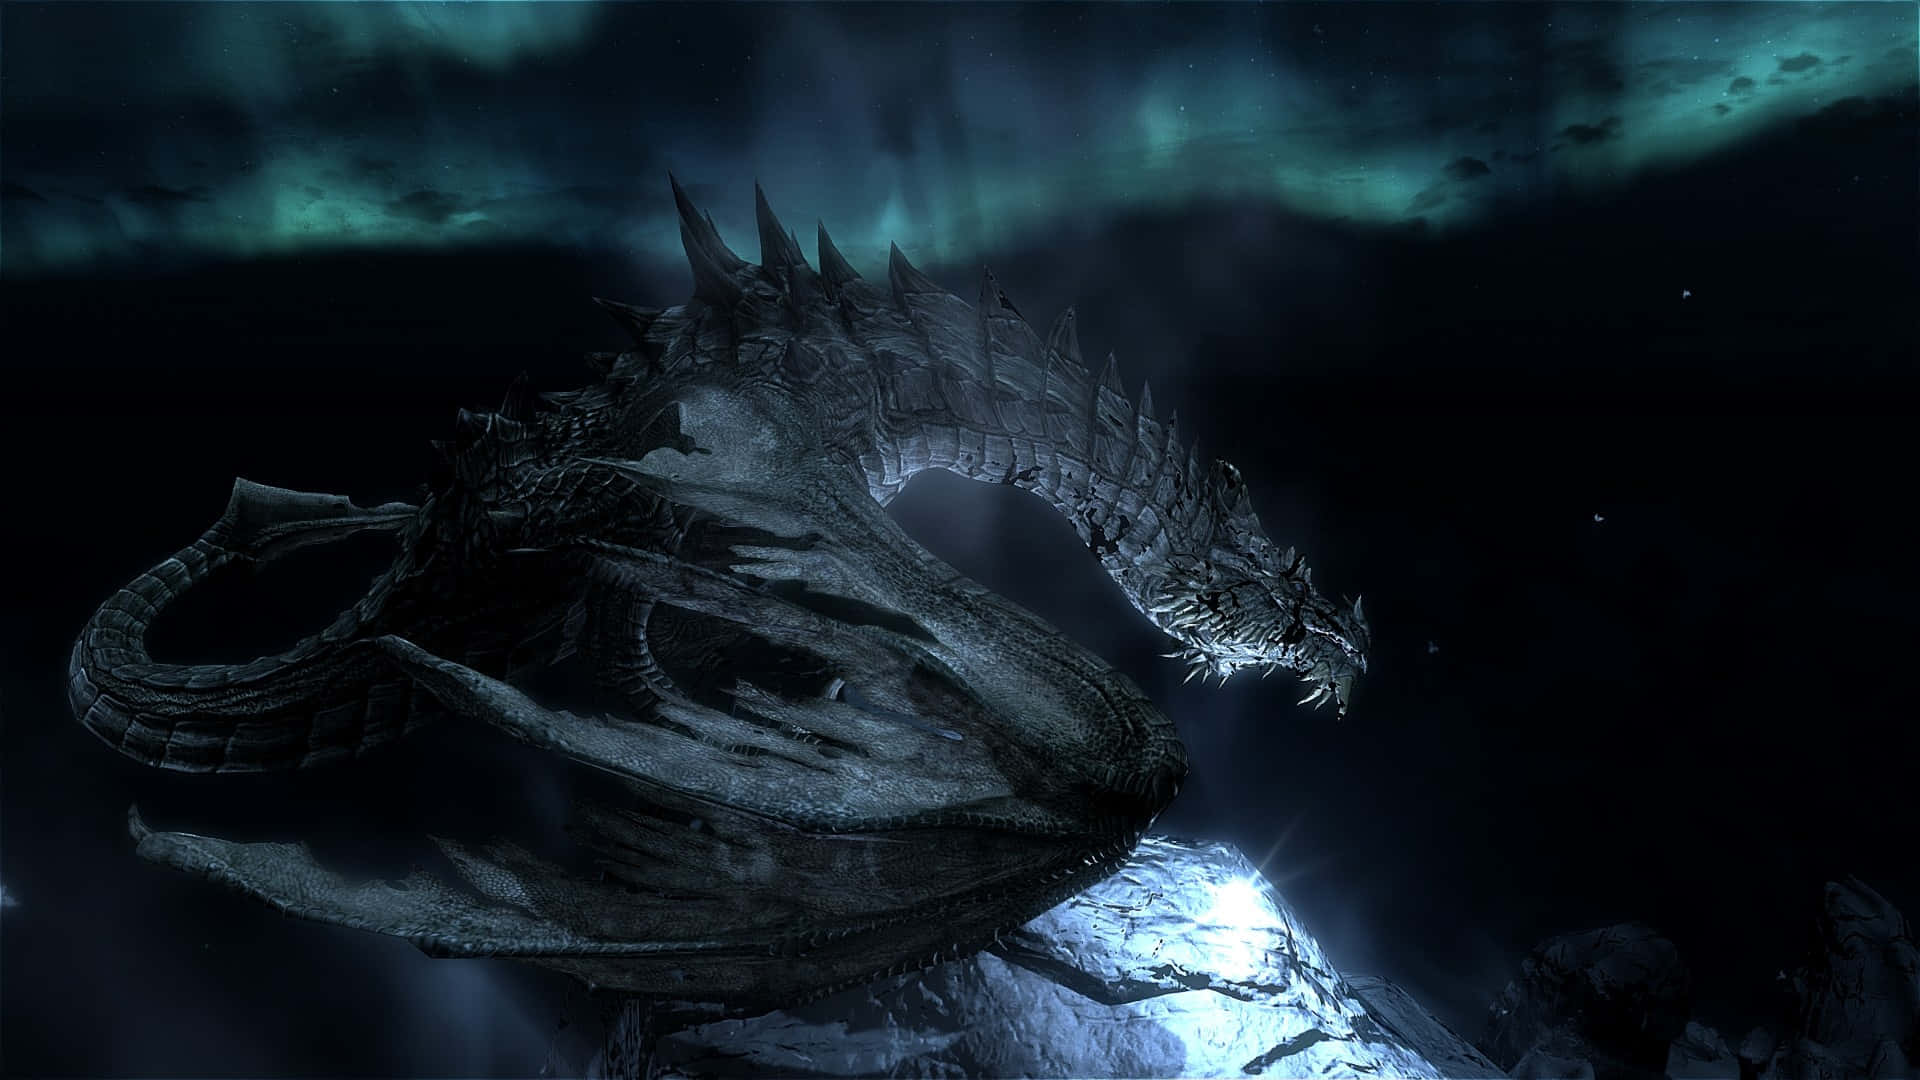 Mystic Paarthurnax atop a snowy mountaintop in the world of Skyrim. Wallpaper